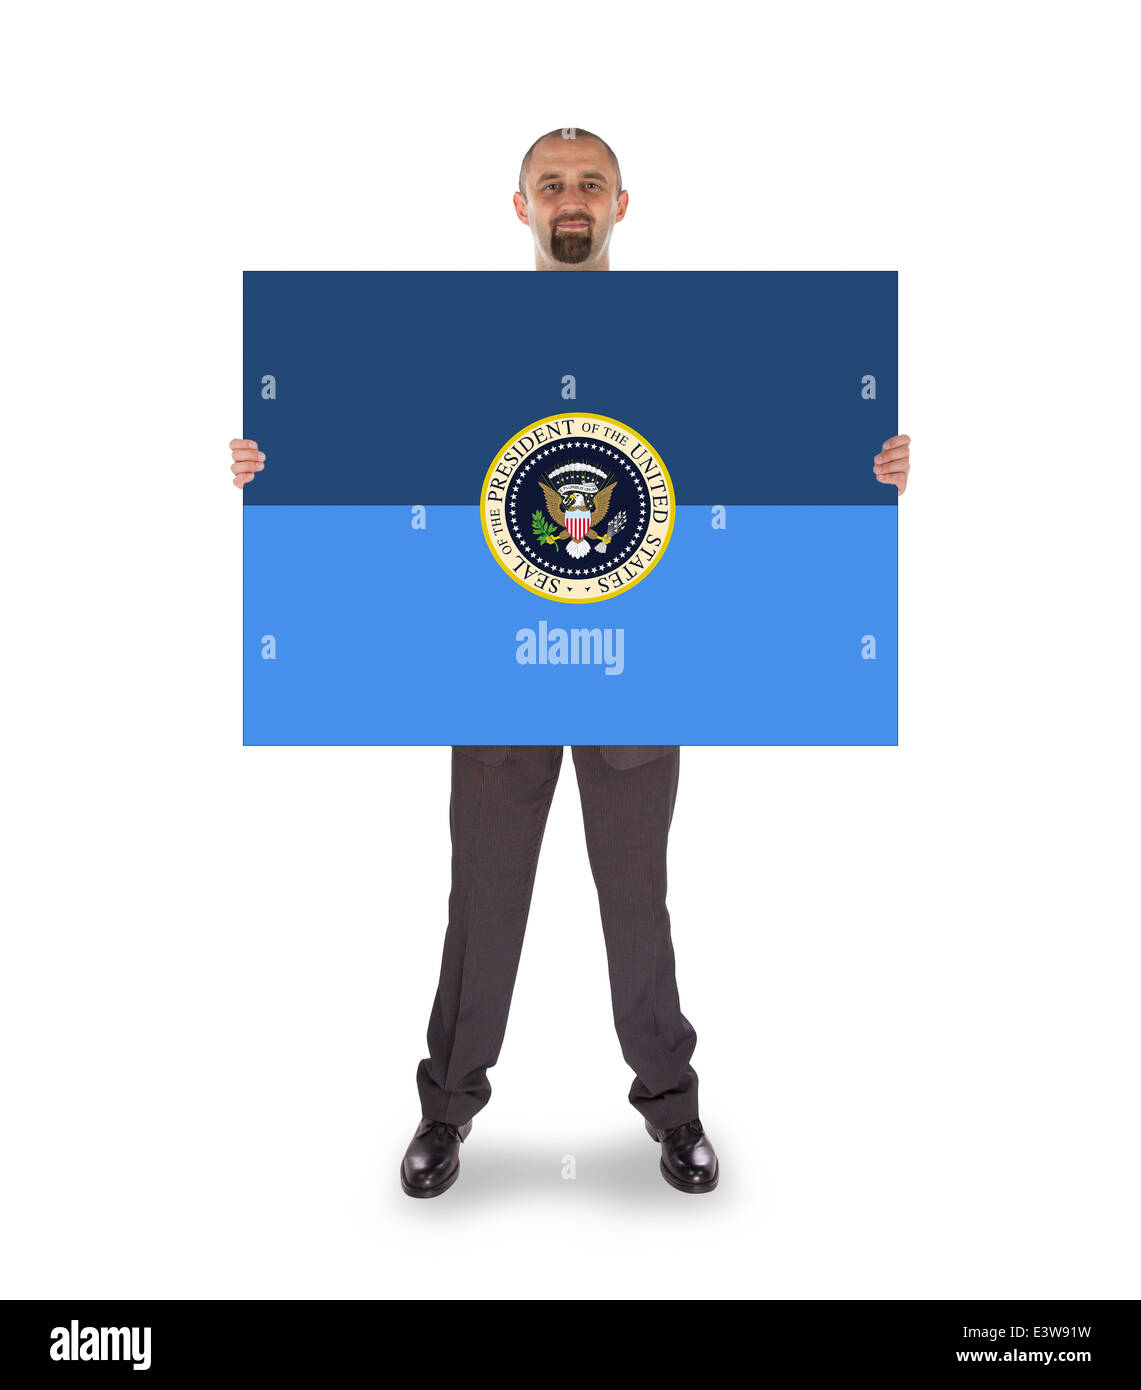 Businessman holding a big card, presidential seal, isolated on white Stock Photo